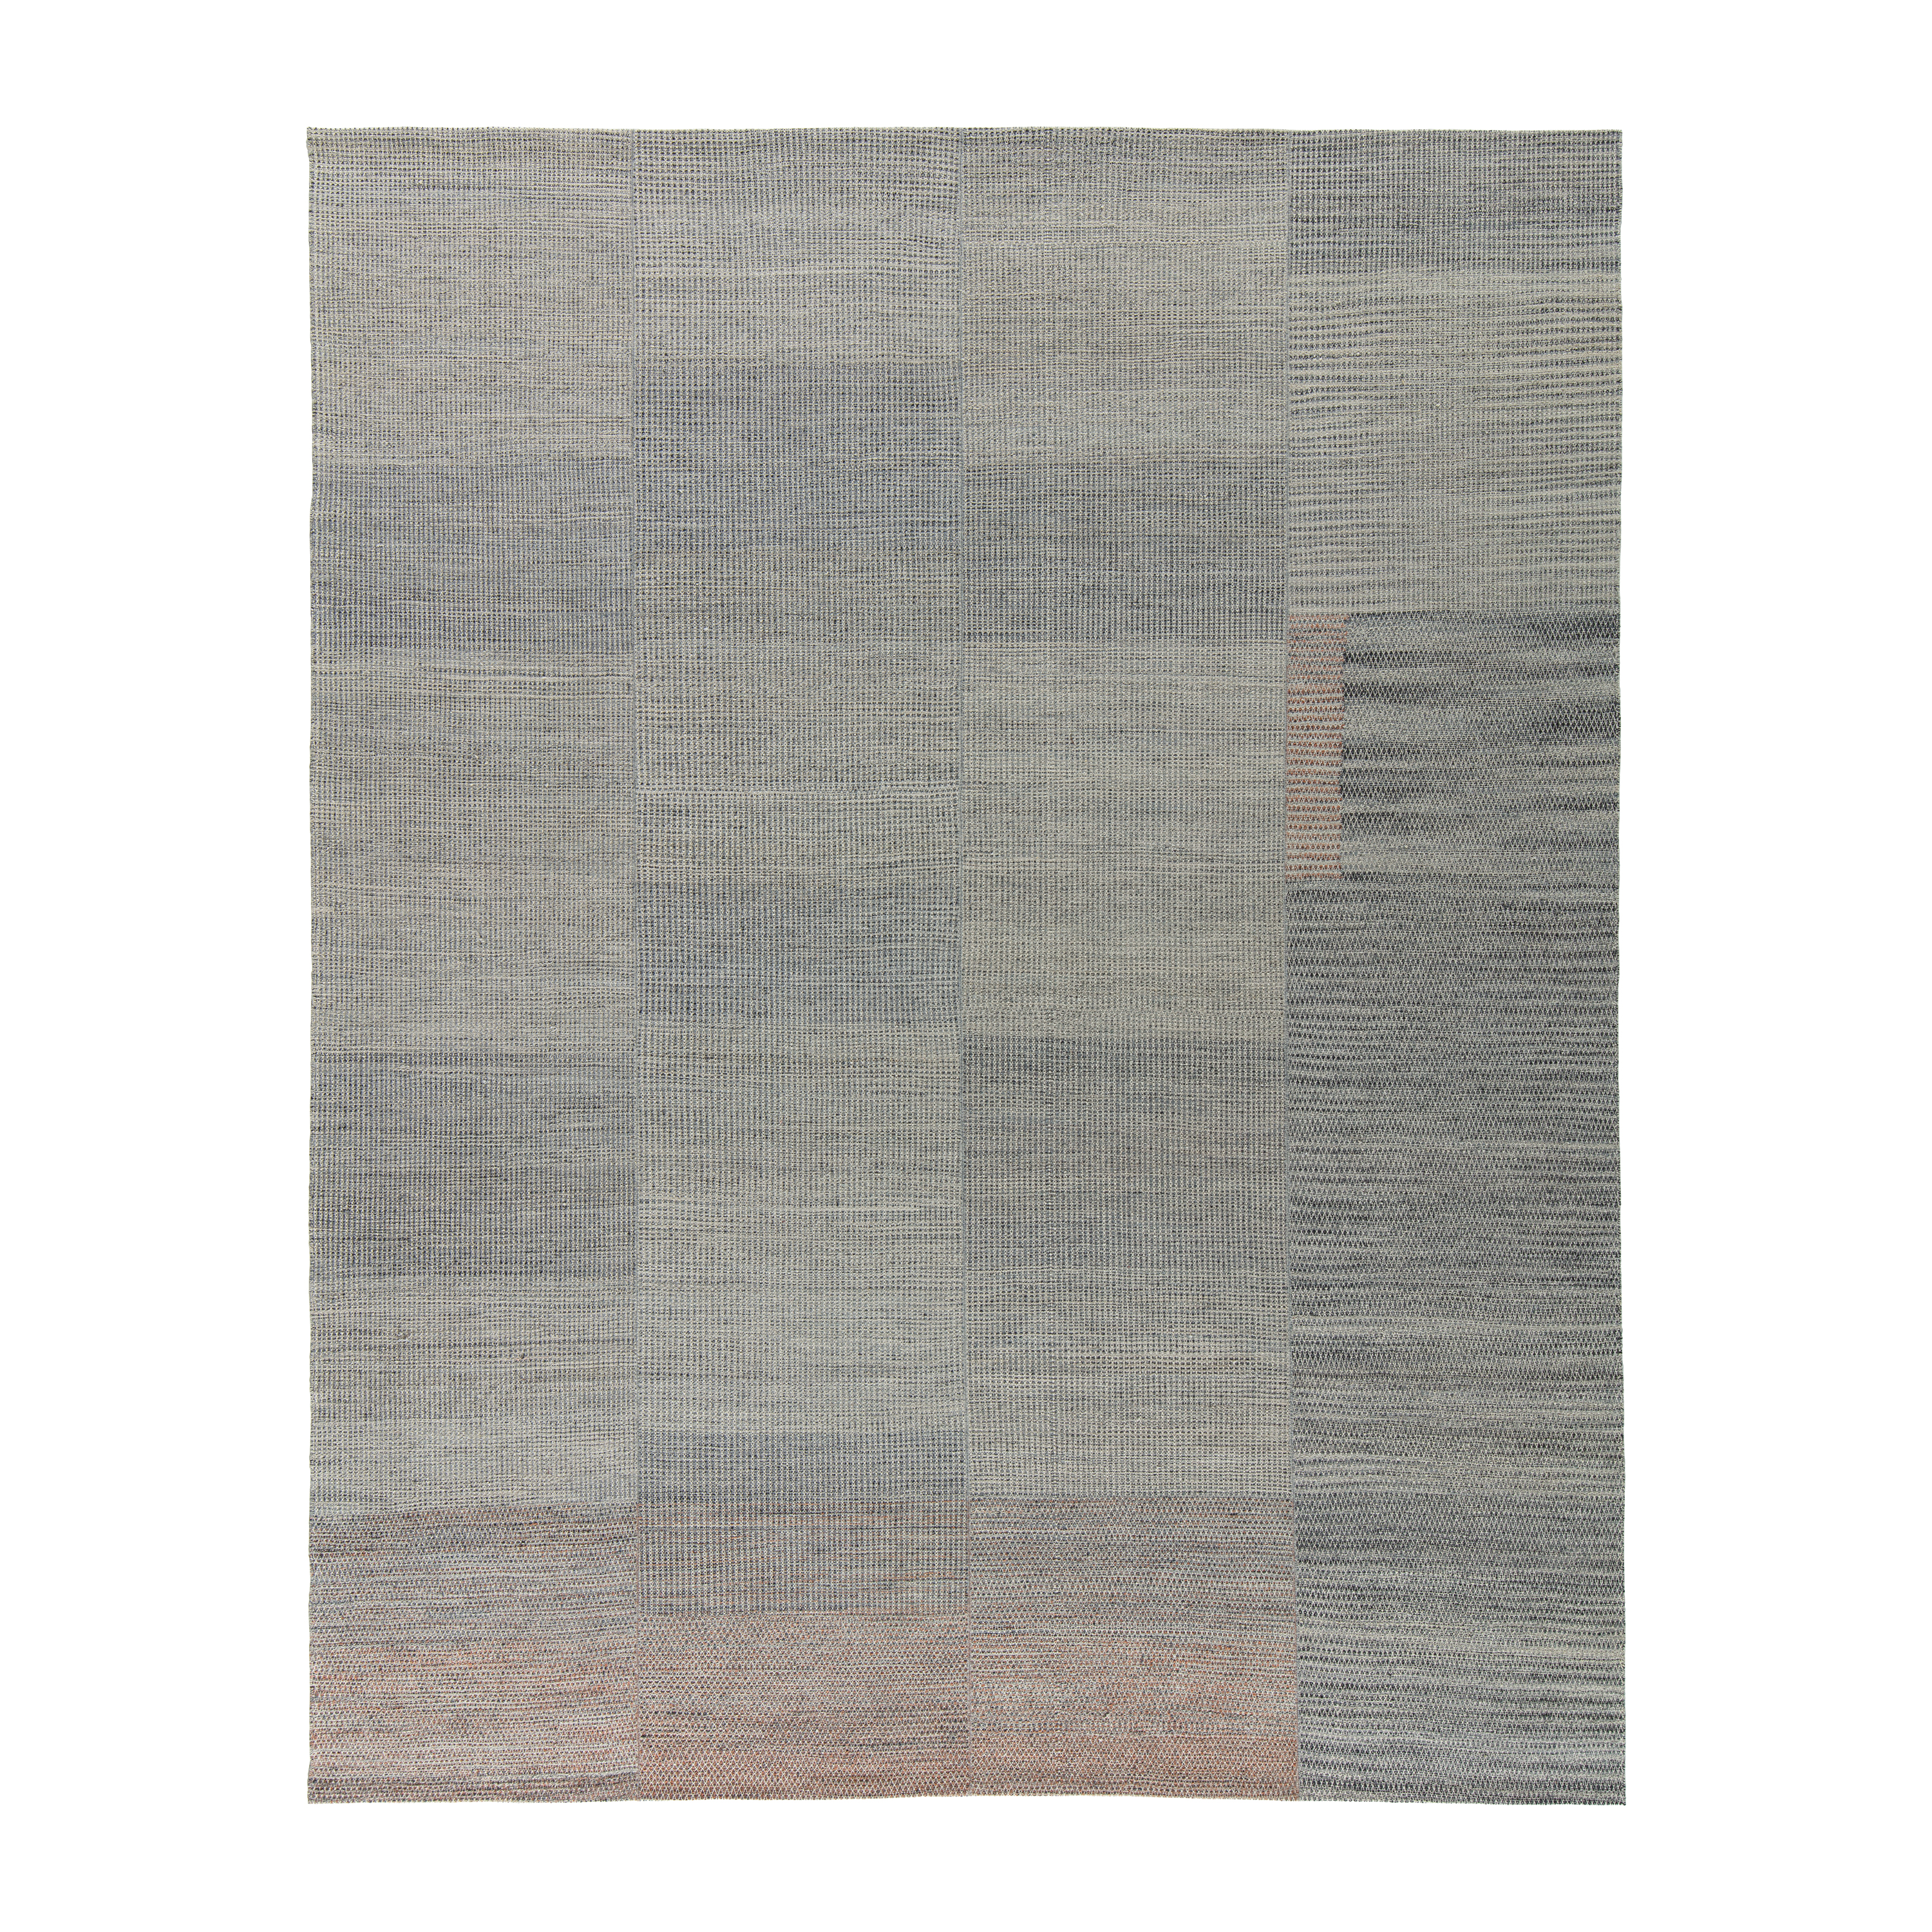 This Damavand flatweave rug made with handspun wool and cotton and natural dyes.